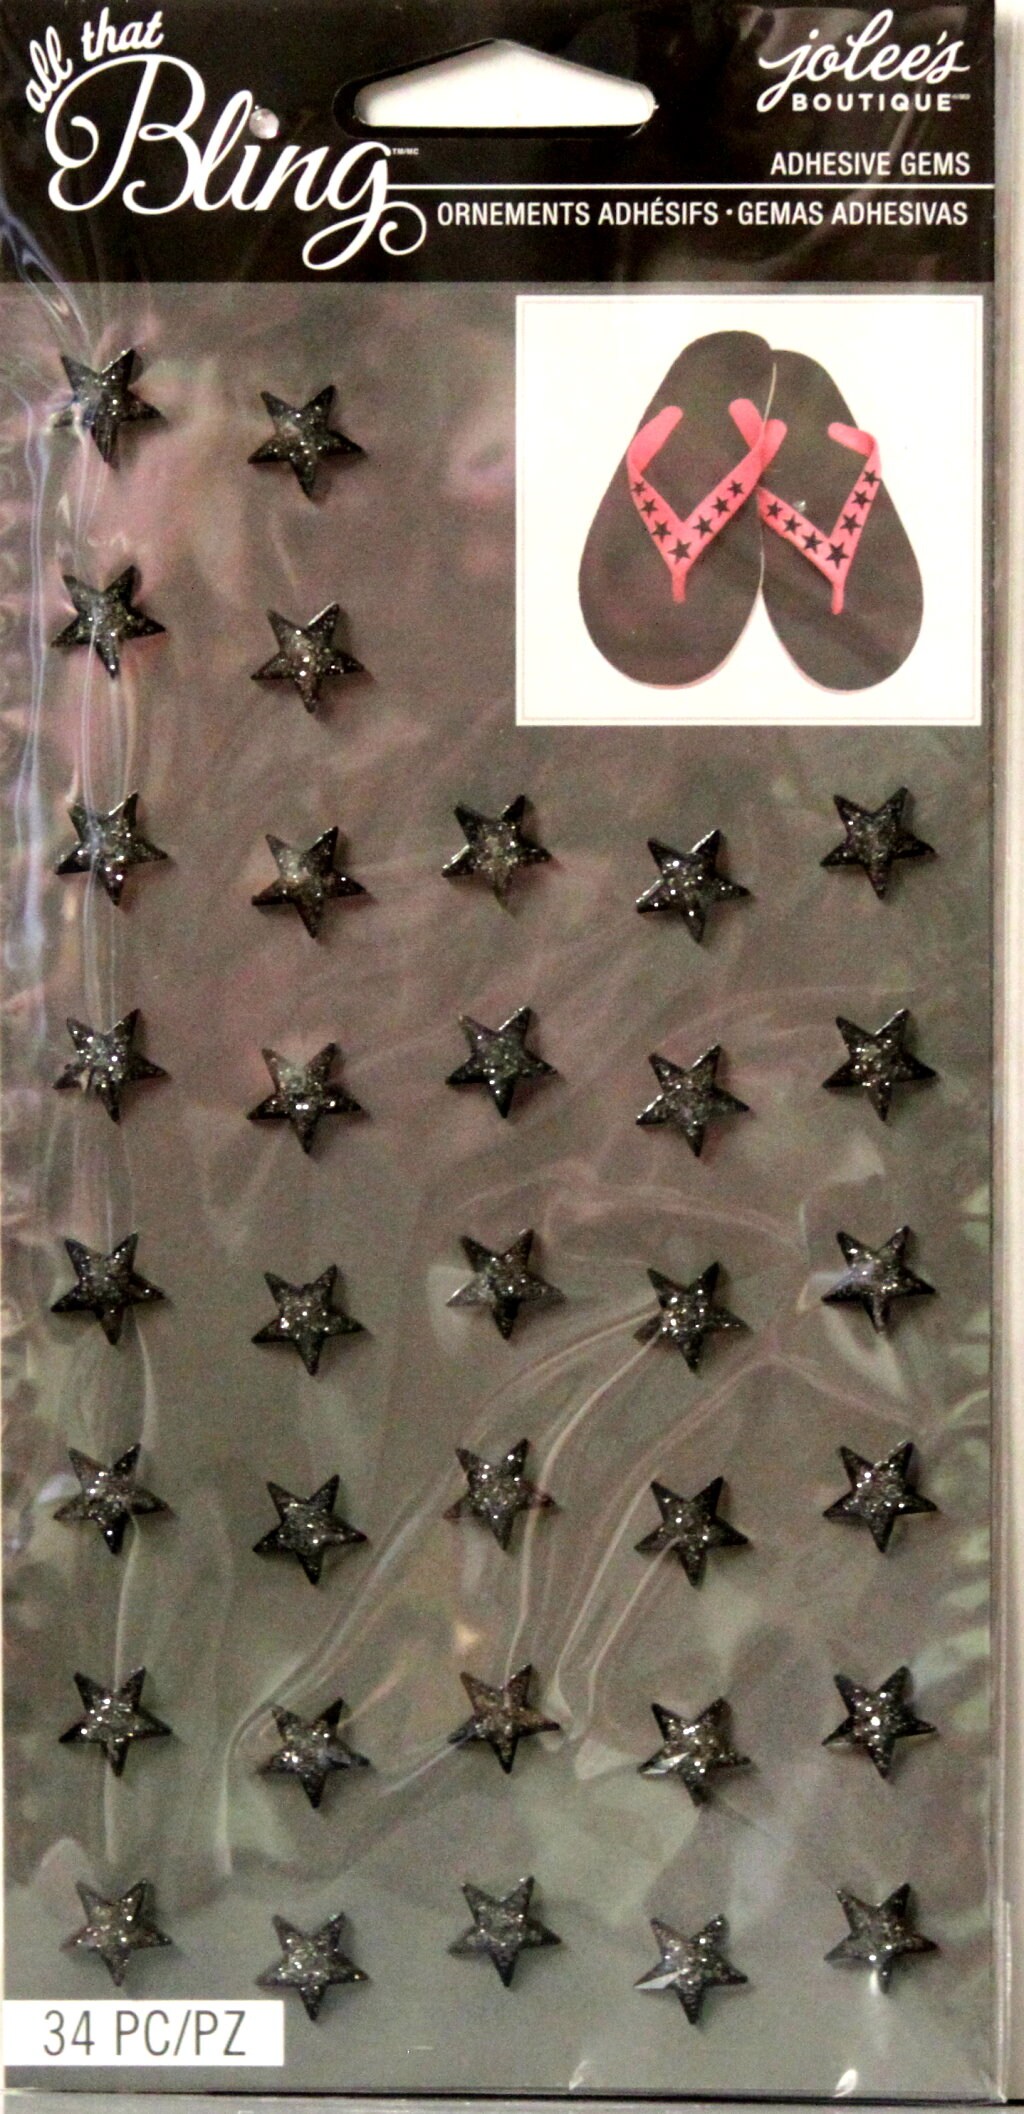 Jolee's Boutique All That Bling Adhesive Gems 24/Pkg-Black